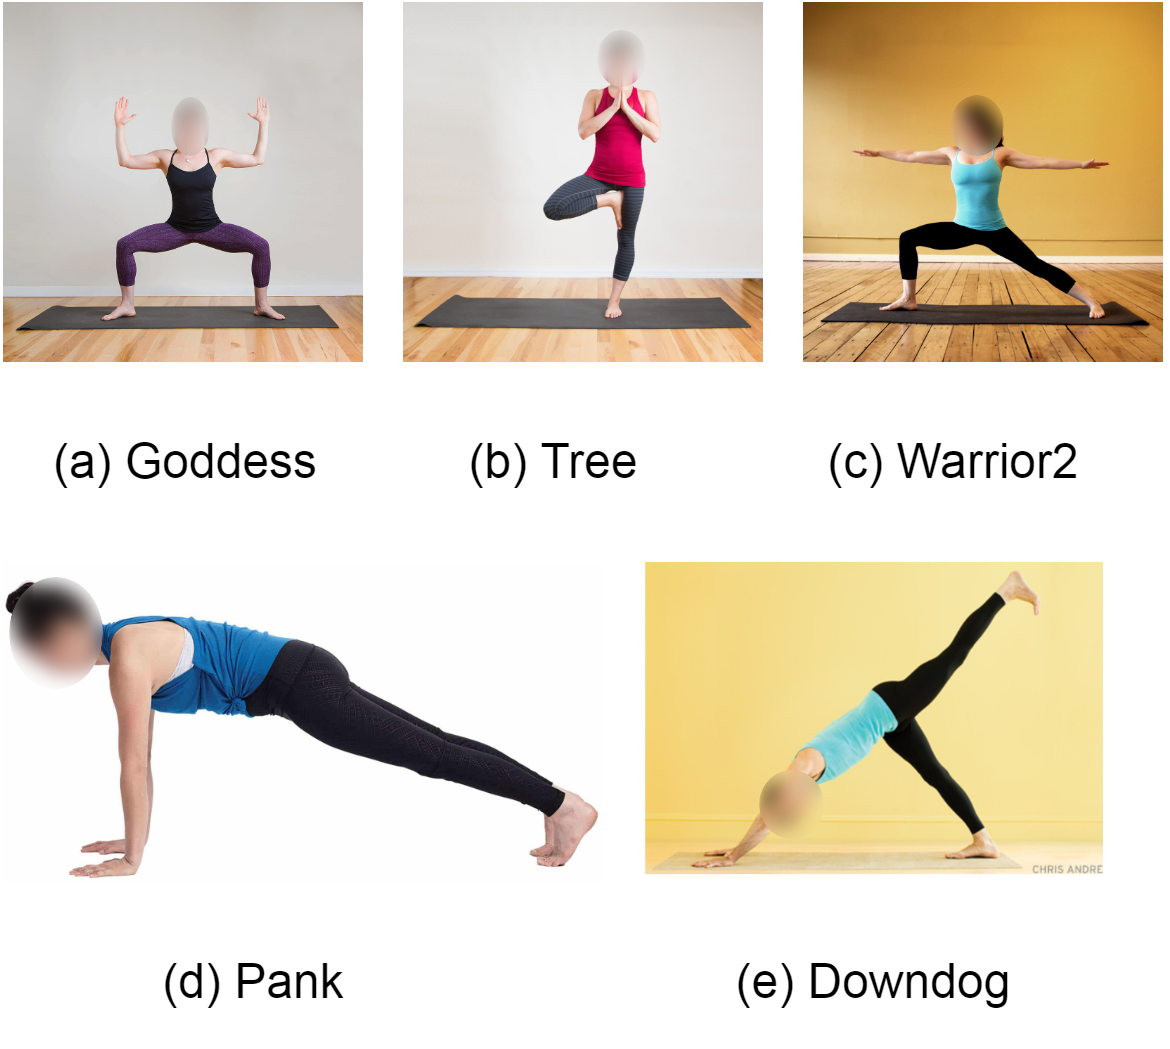 Yoga poses with predicted joints and true joints location obtained